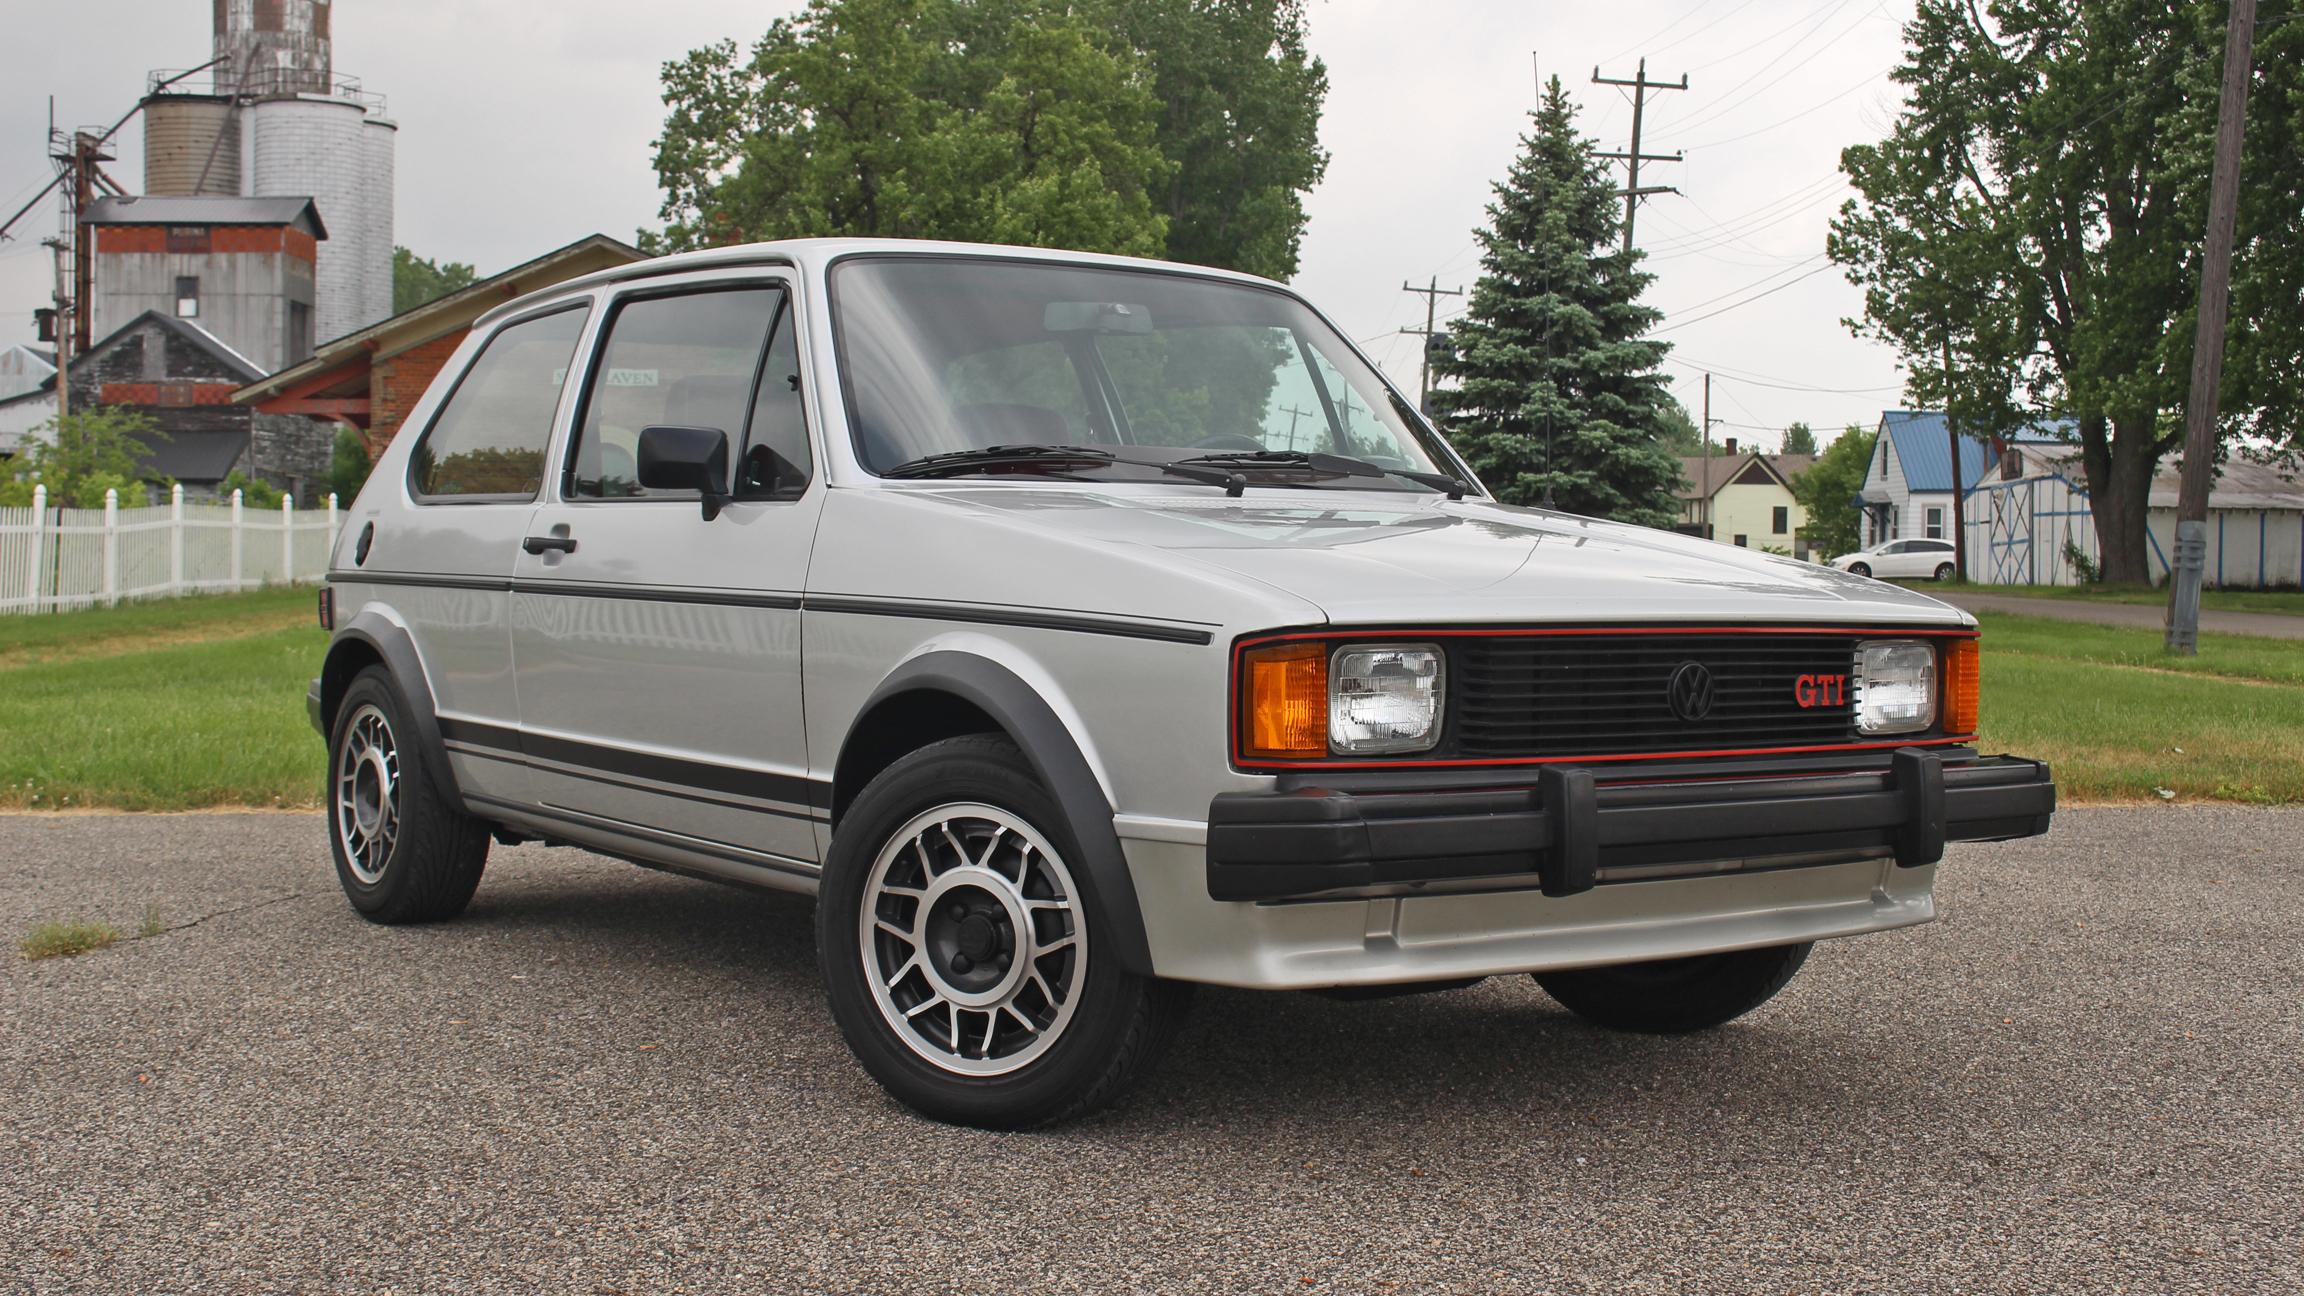 1984 VW Rabbit GTI Retro Review | Looks like a toaster; cooks like one too  - Autoblog